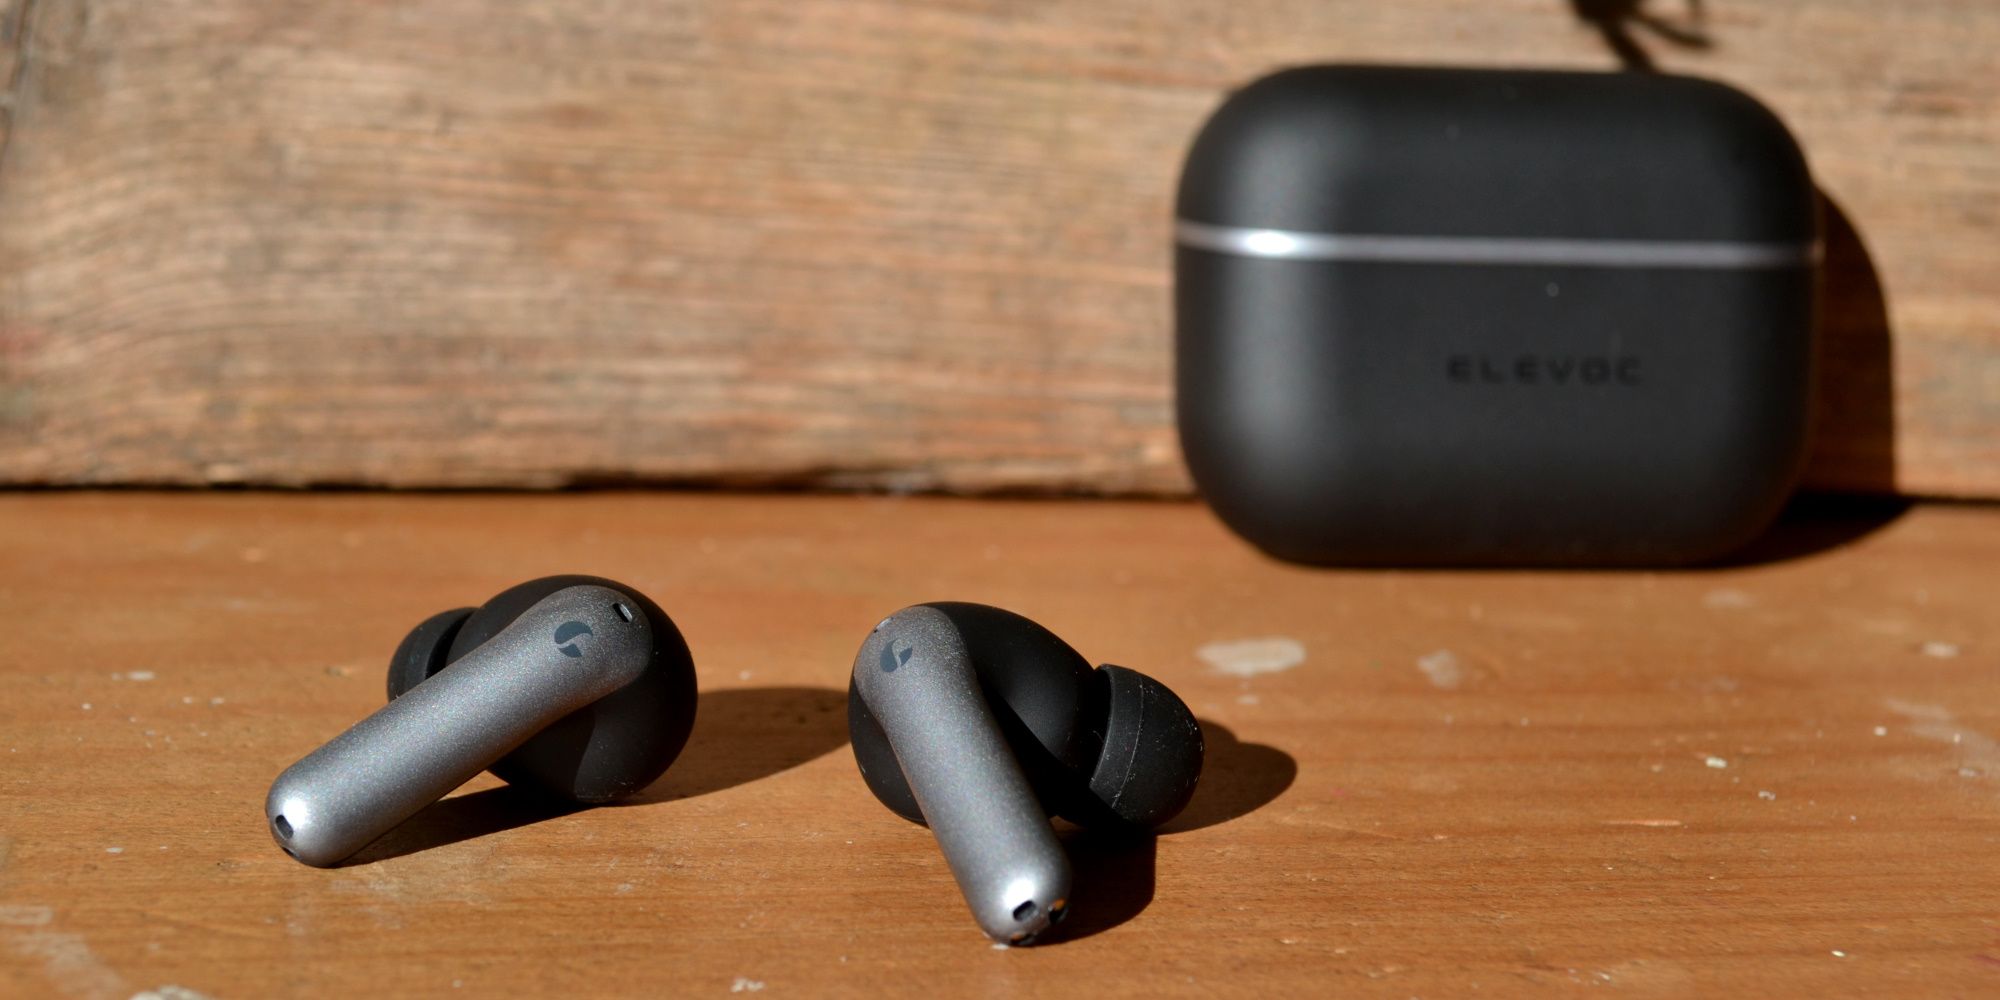 elevoc clear earbuds review earbuds case background